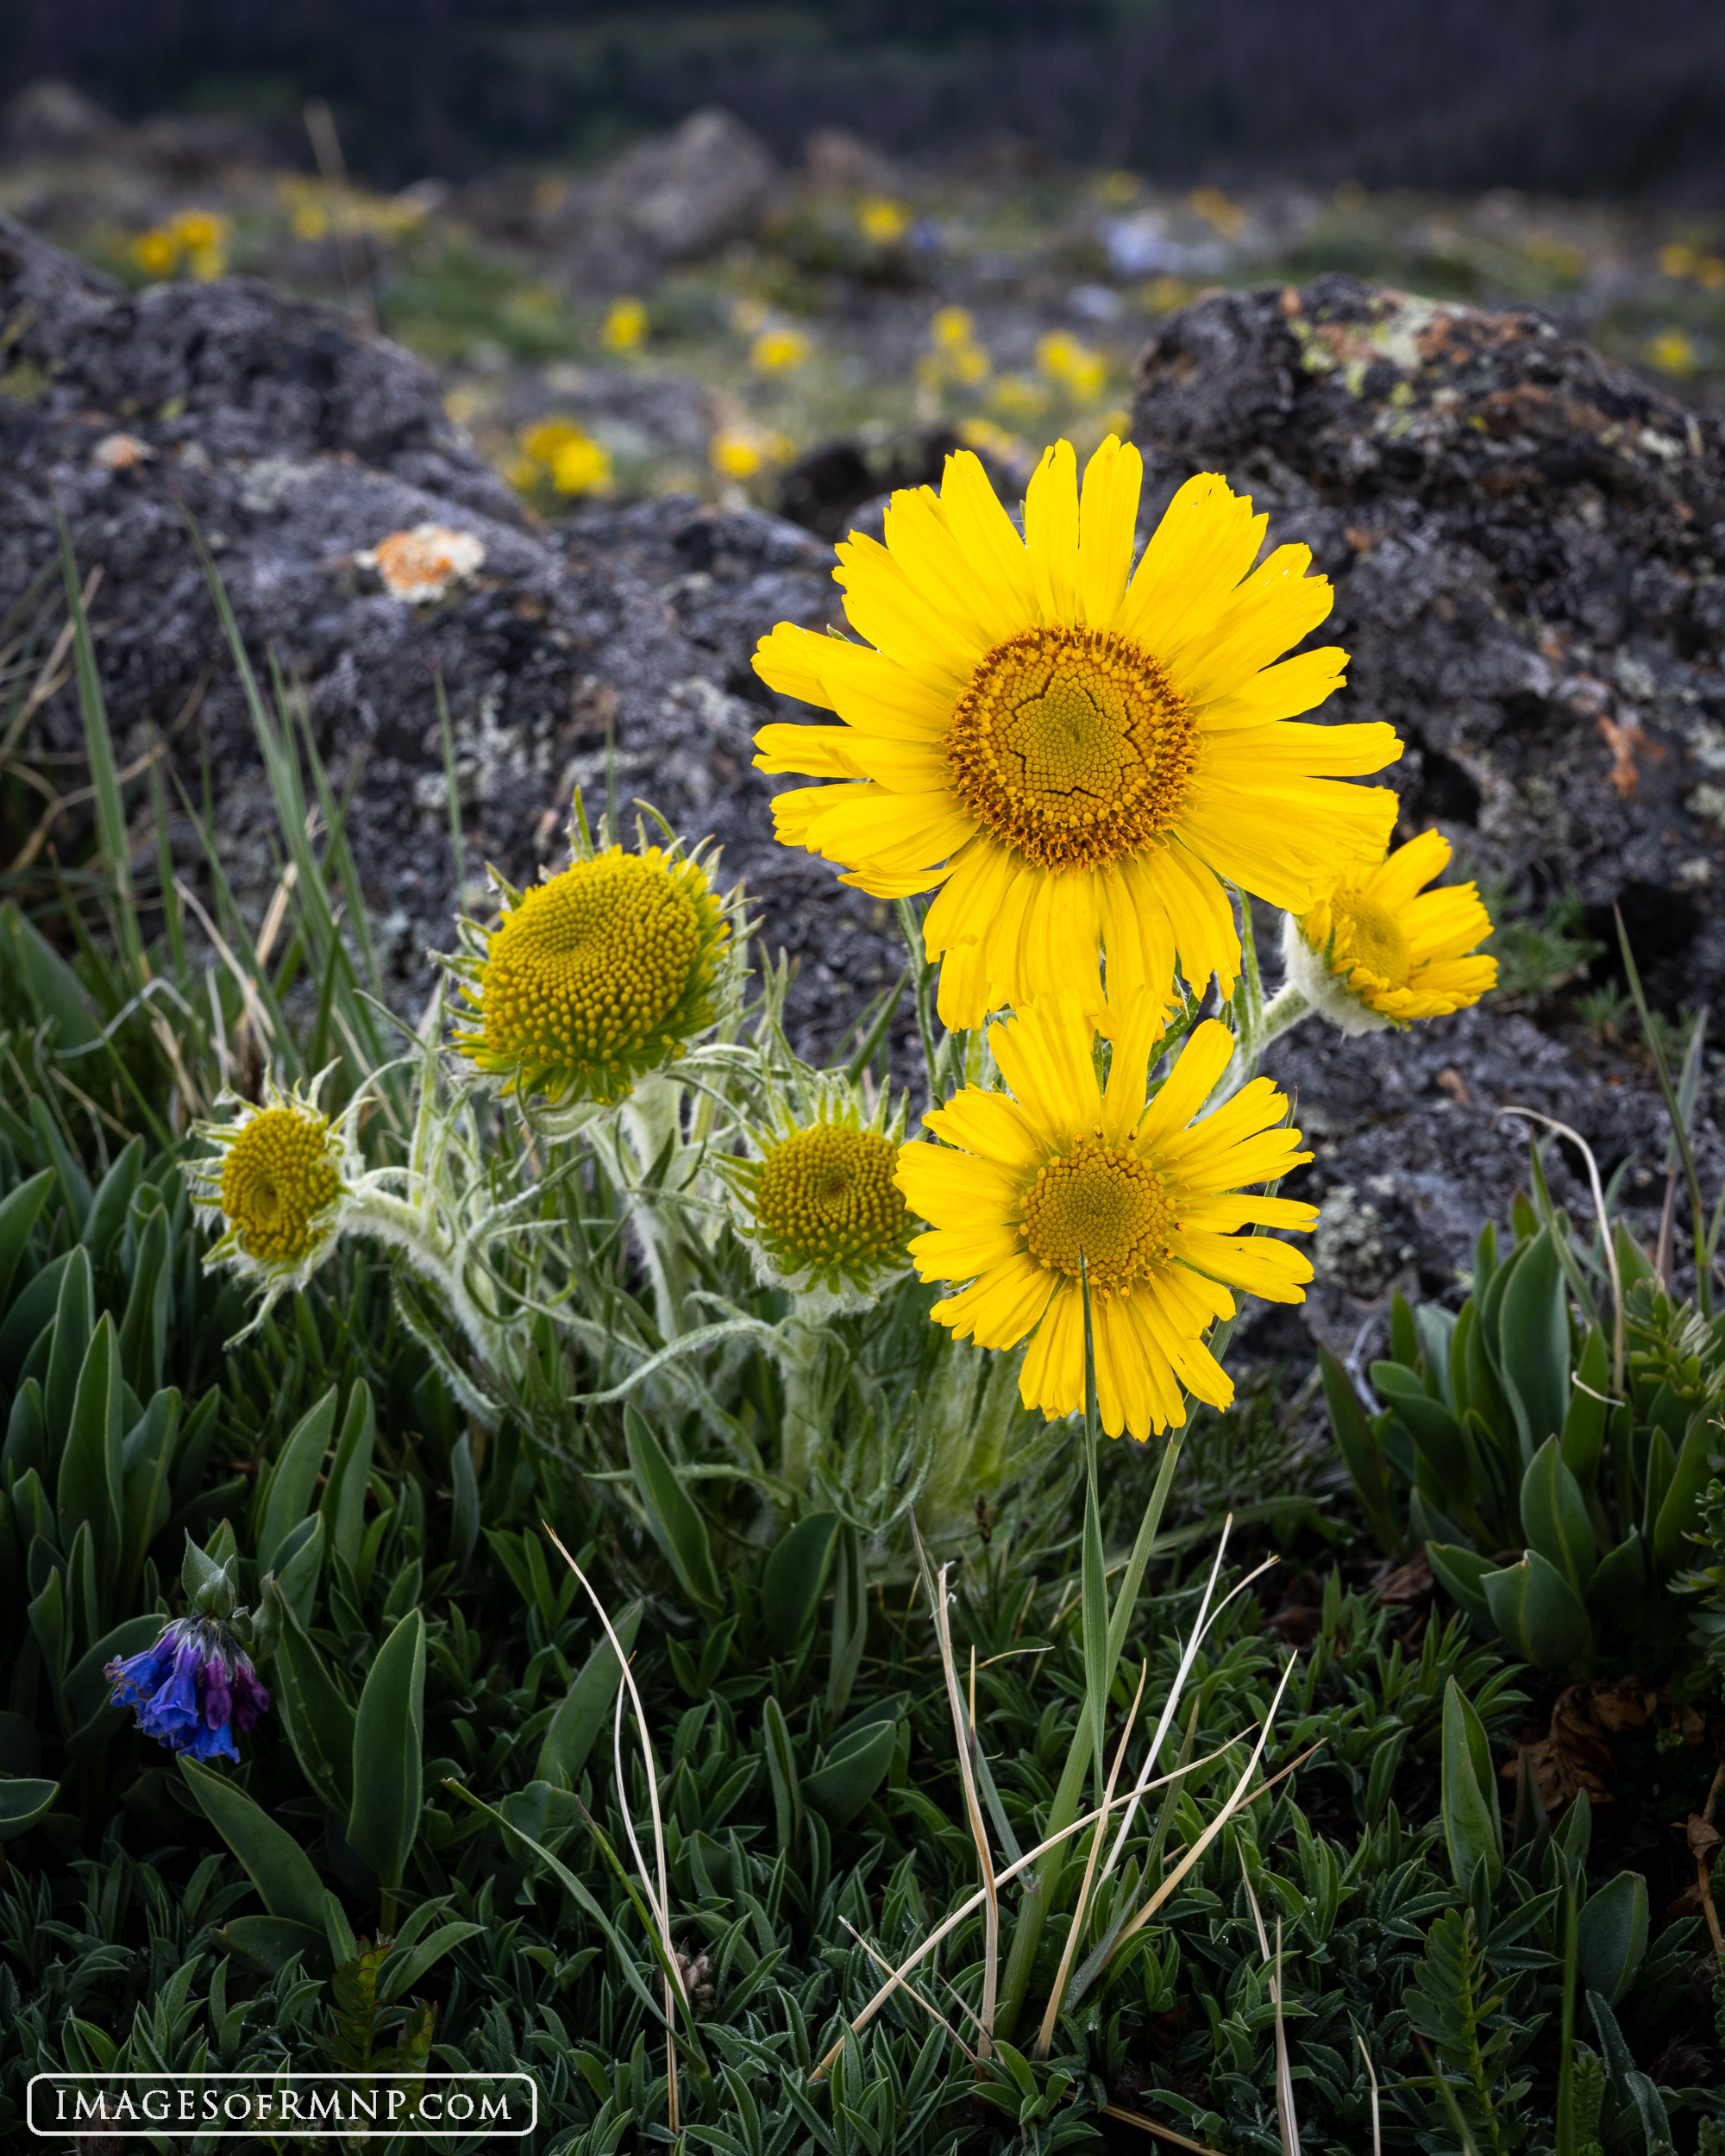 The highlight of each summer are when the alpine sunflowers break into bloom in the alpine zone of Rocky Mountain National Park...